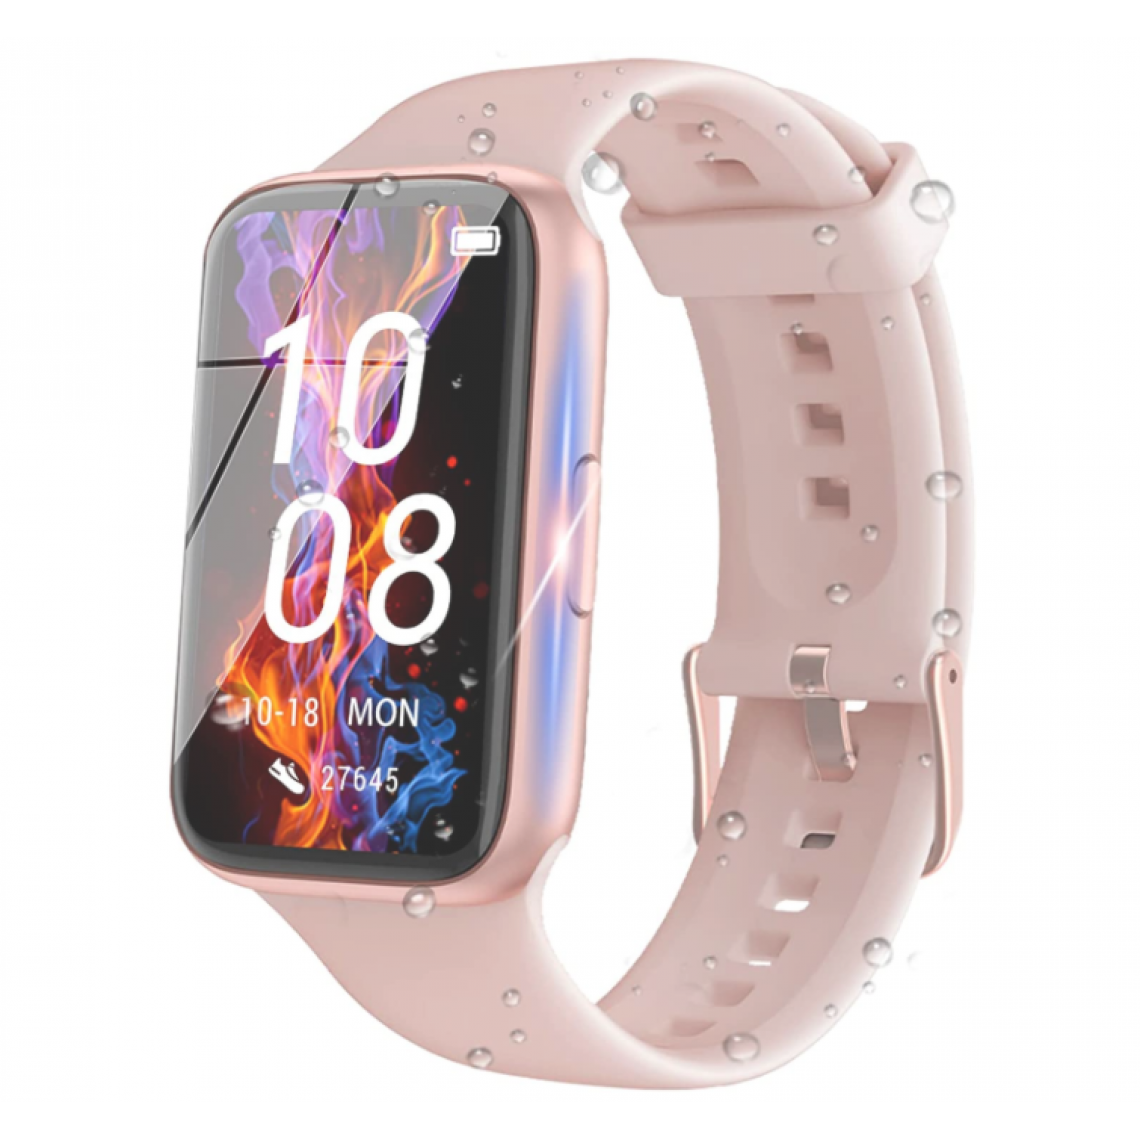 Chronotech Montres - Chronus Smart Watch,1.47" HD Full Touch Screen Smartwatch for Android and iOS Phones GADIXY Fitness Tracker with Sleep & Heart Rate & Blood Oxygen Monitor (Pink) - Montre connectée